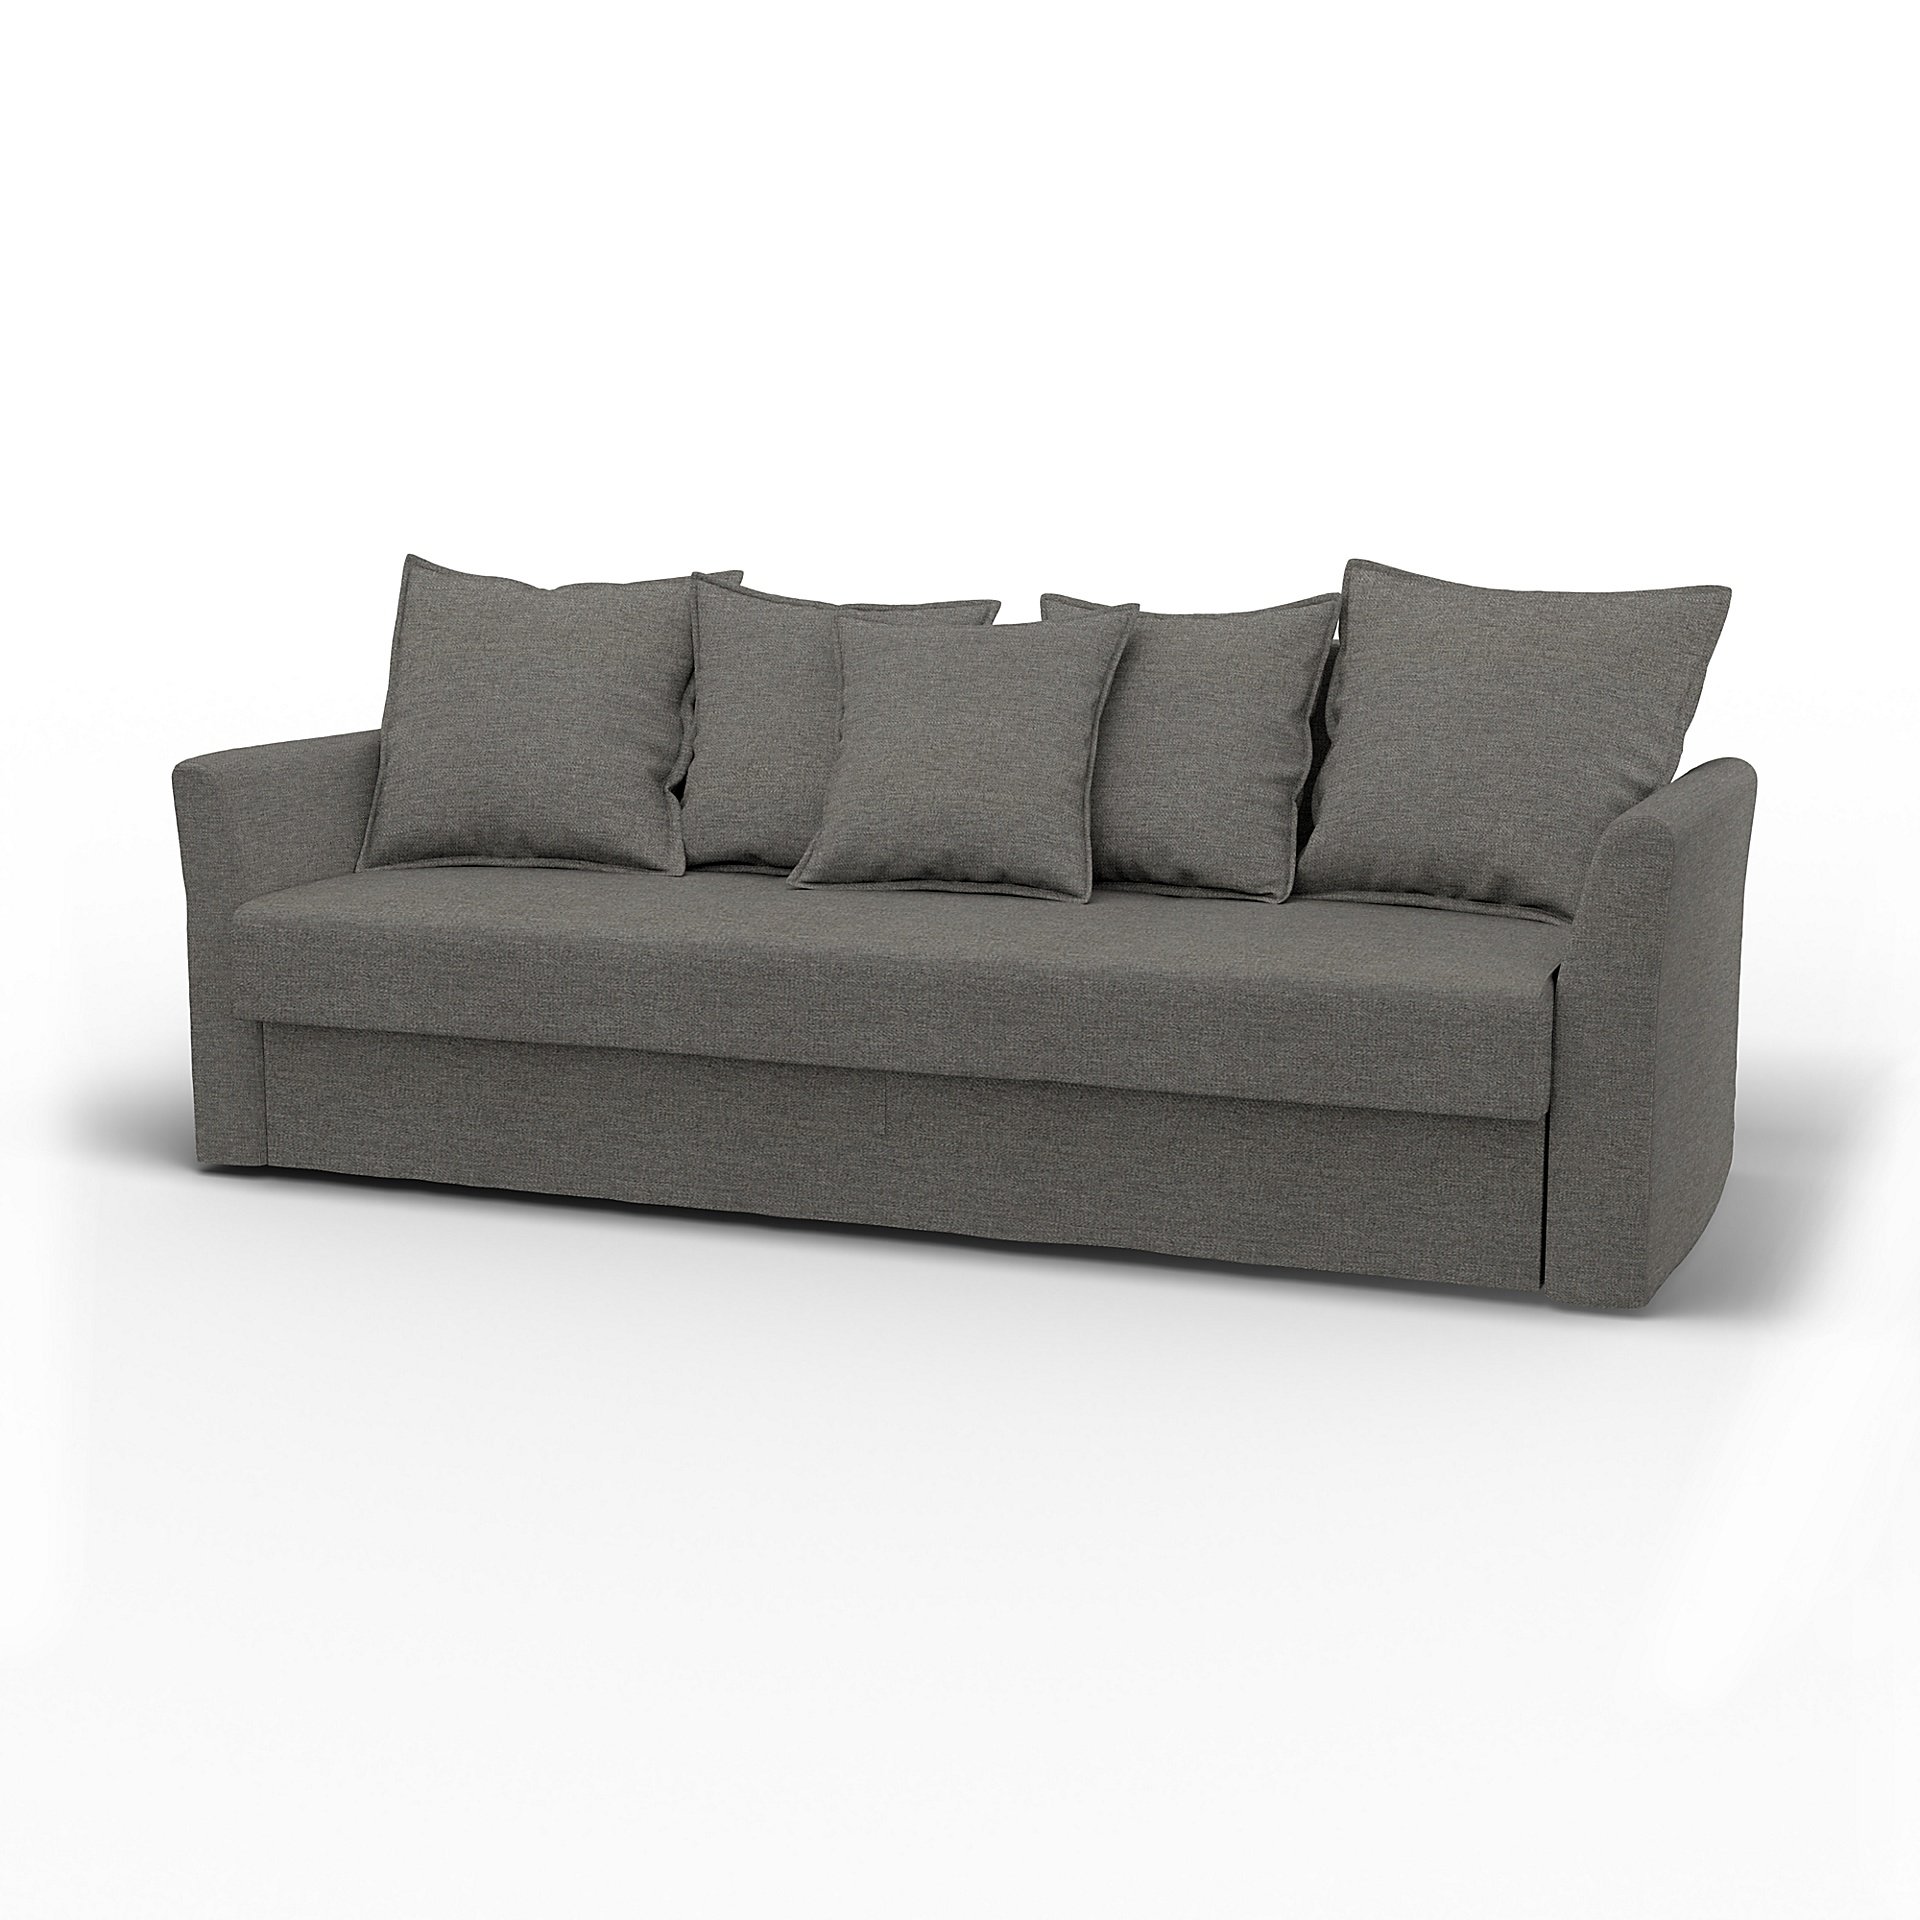 IKEA - Holmsund Sofabed, Taupe, Boucle & Texture - Bemz